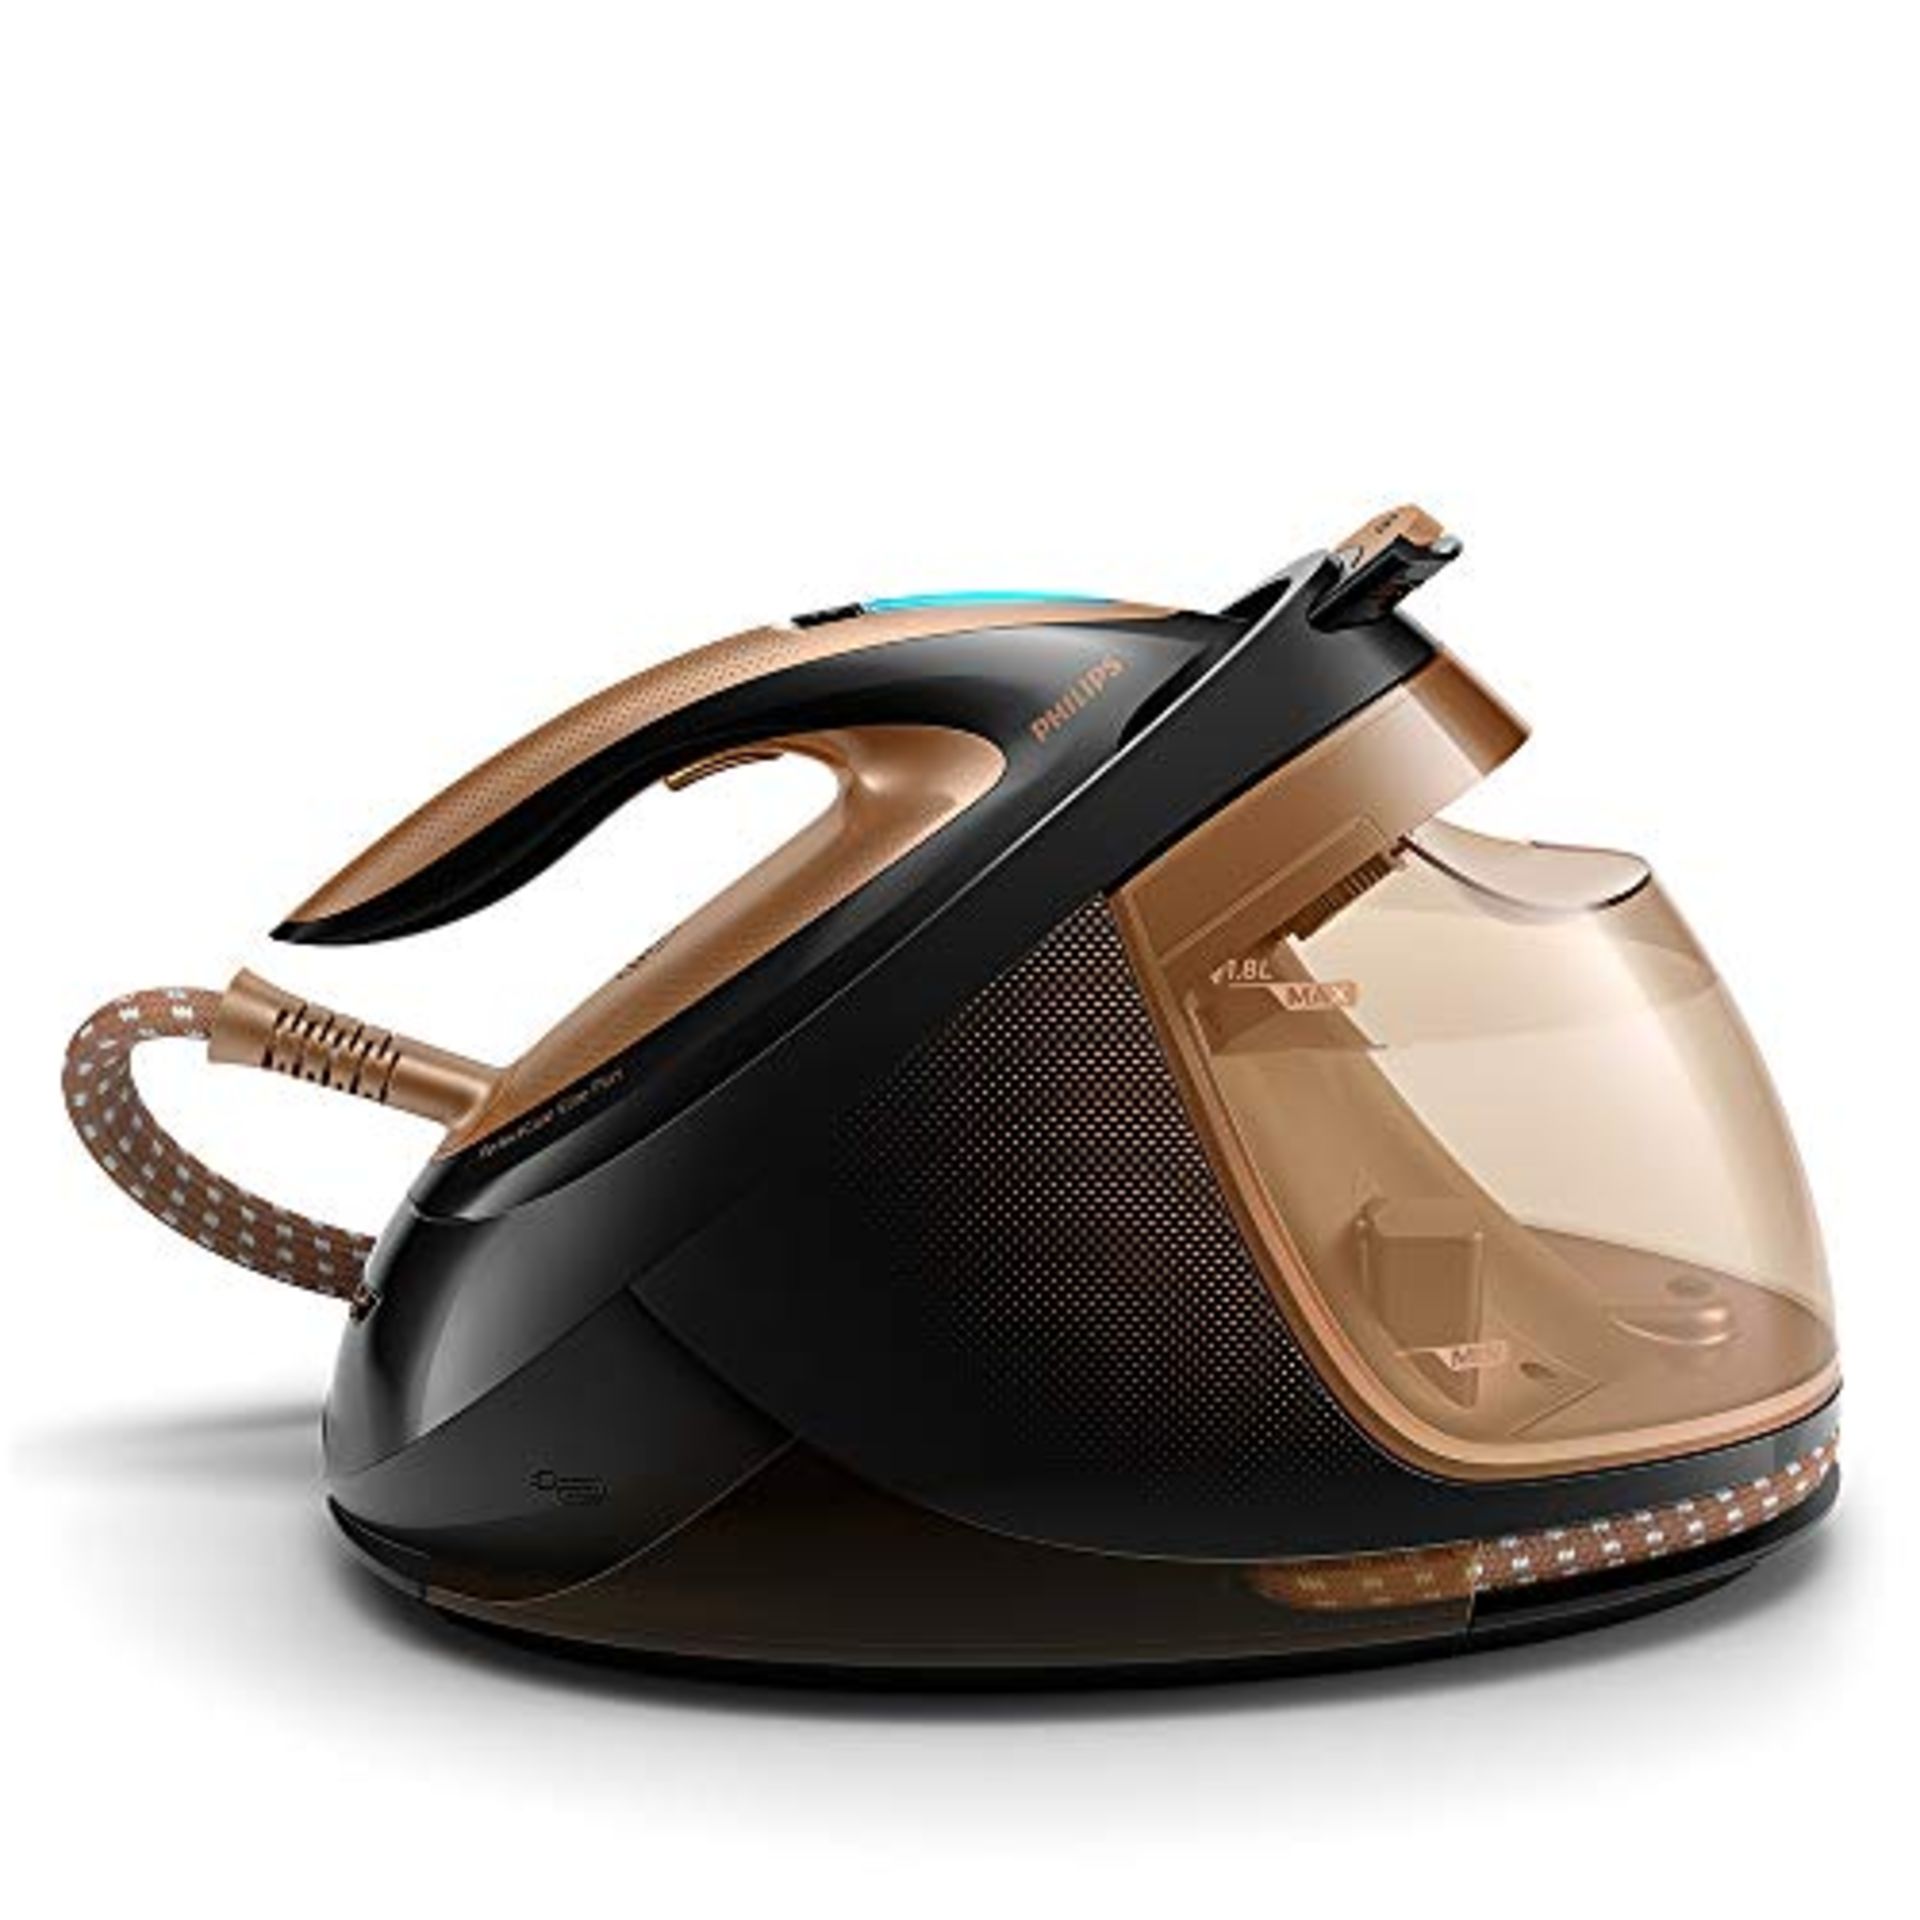 RRP £496.00 Philips PerfectCare Elite Plus Steam Generator Iron for Large Family Basket Loads, wit